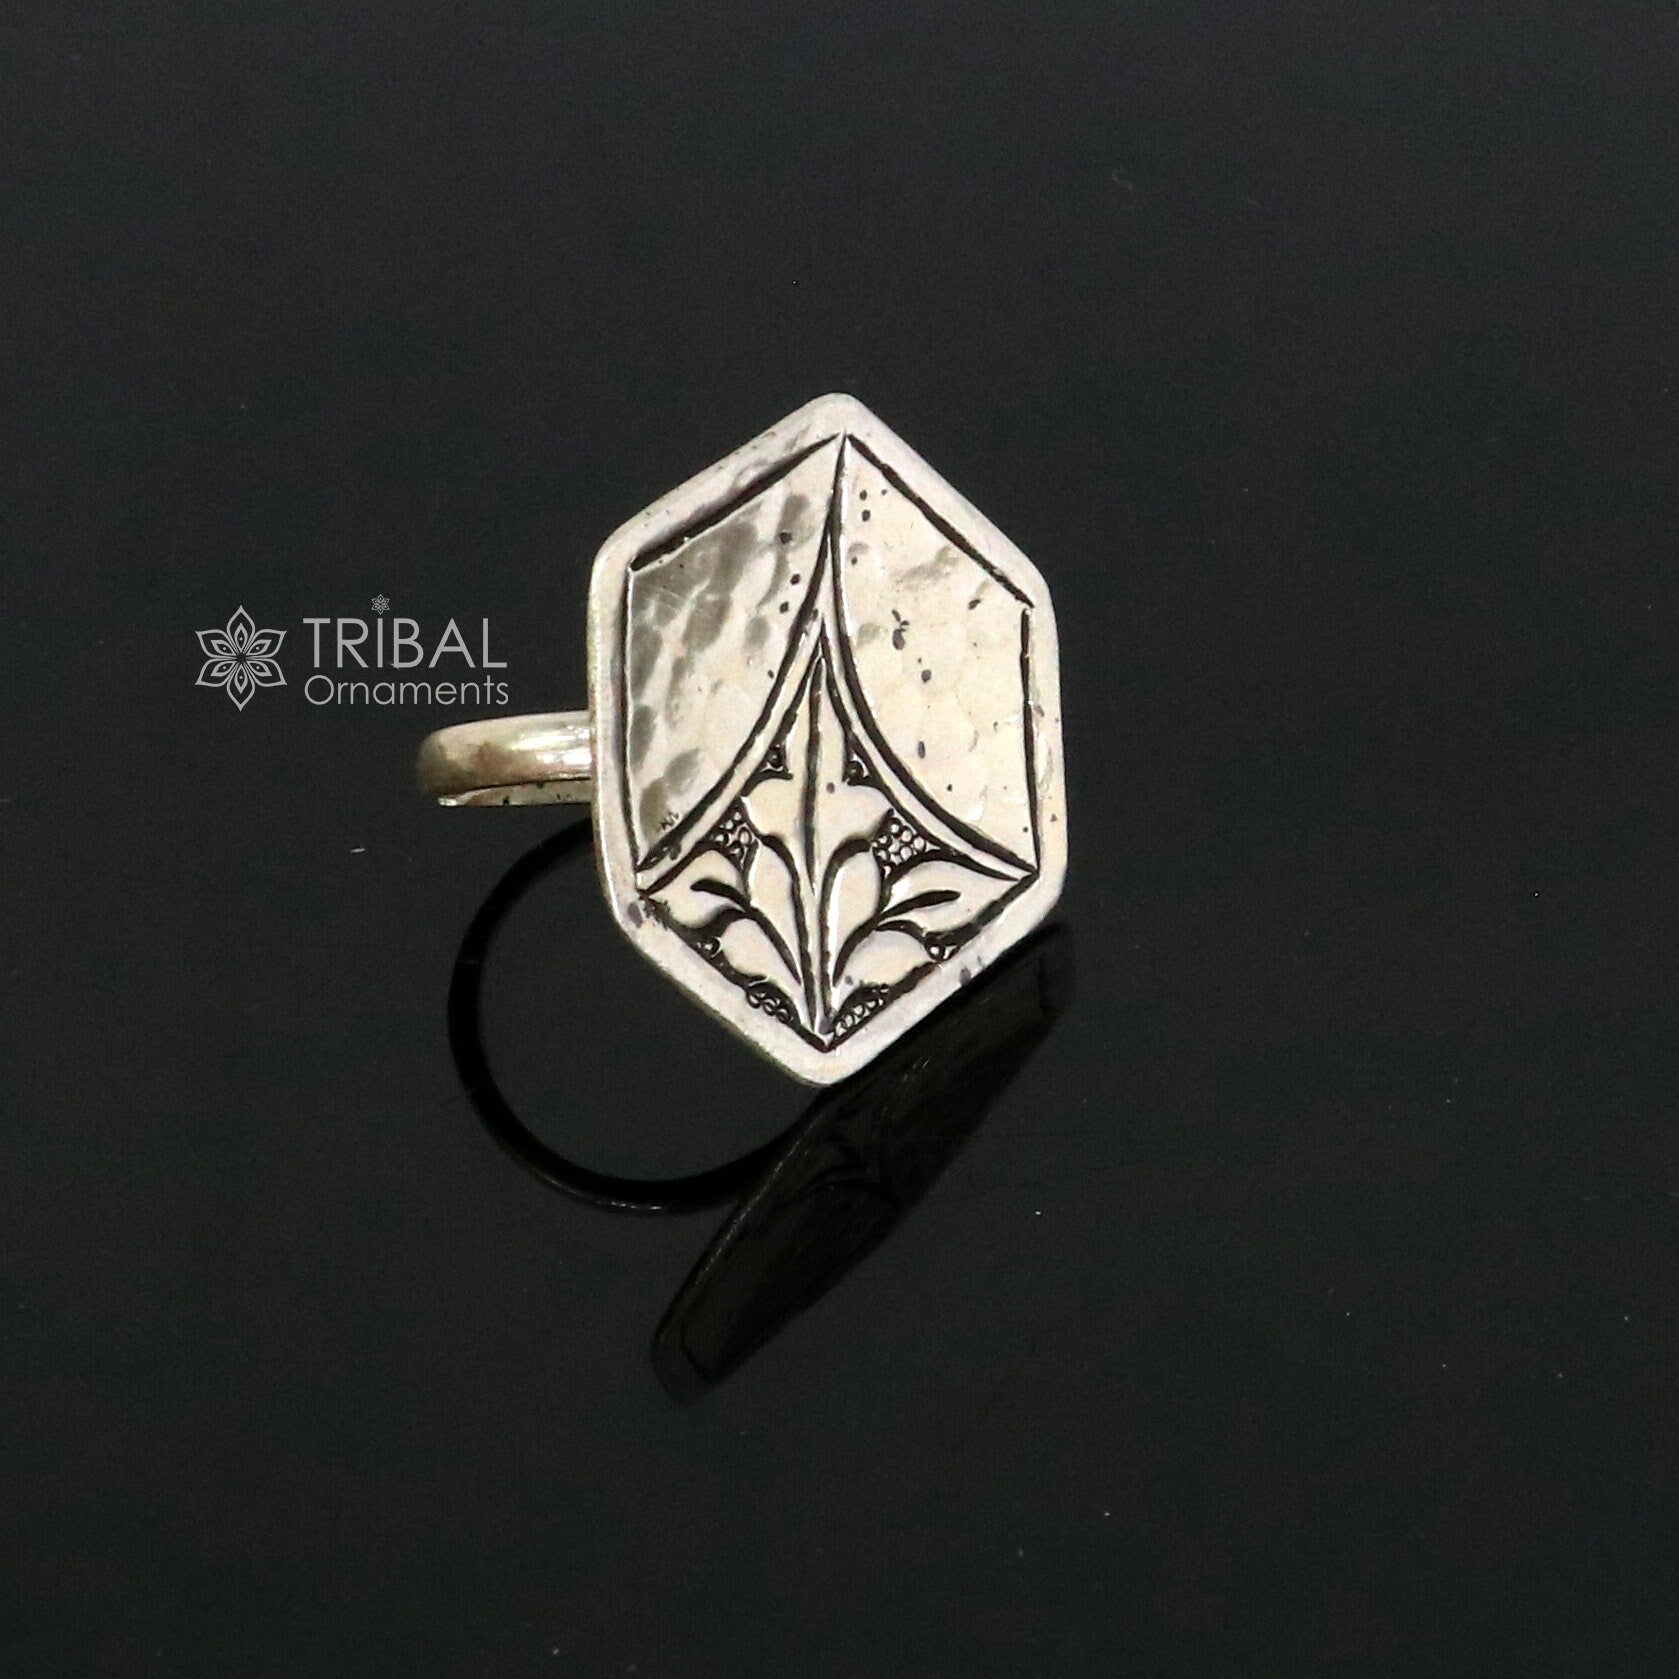 Amazing style Indian Classical cultural flower design 925 sterling silver adjustable ring, best tribal ethnic jewelry Navratri jewelry sr393 - TRIBAL ORNAMENTS